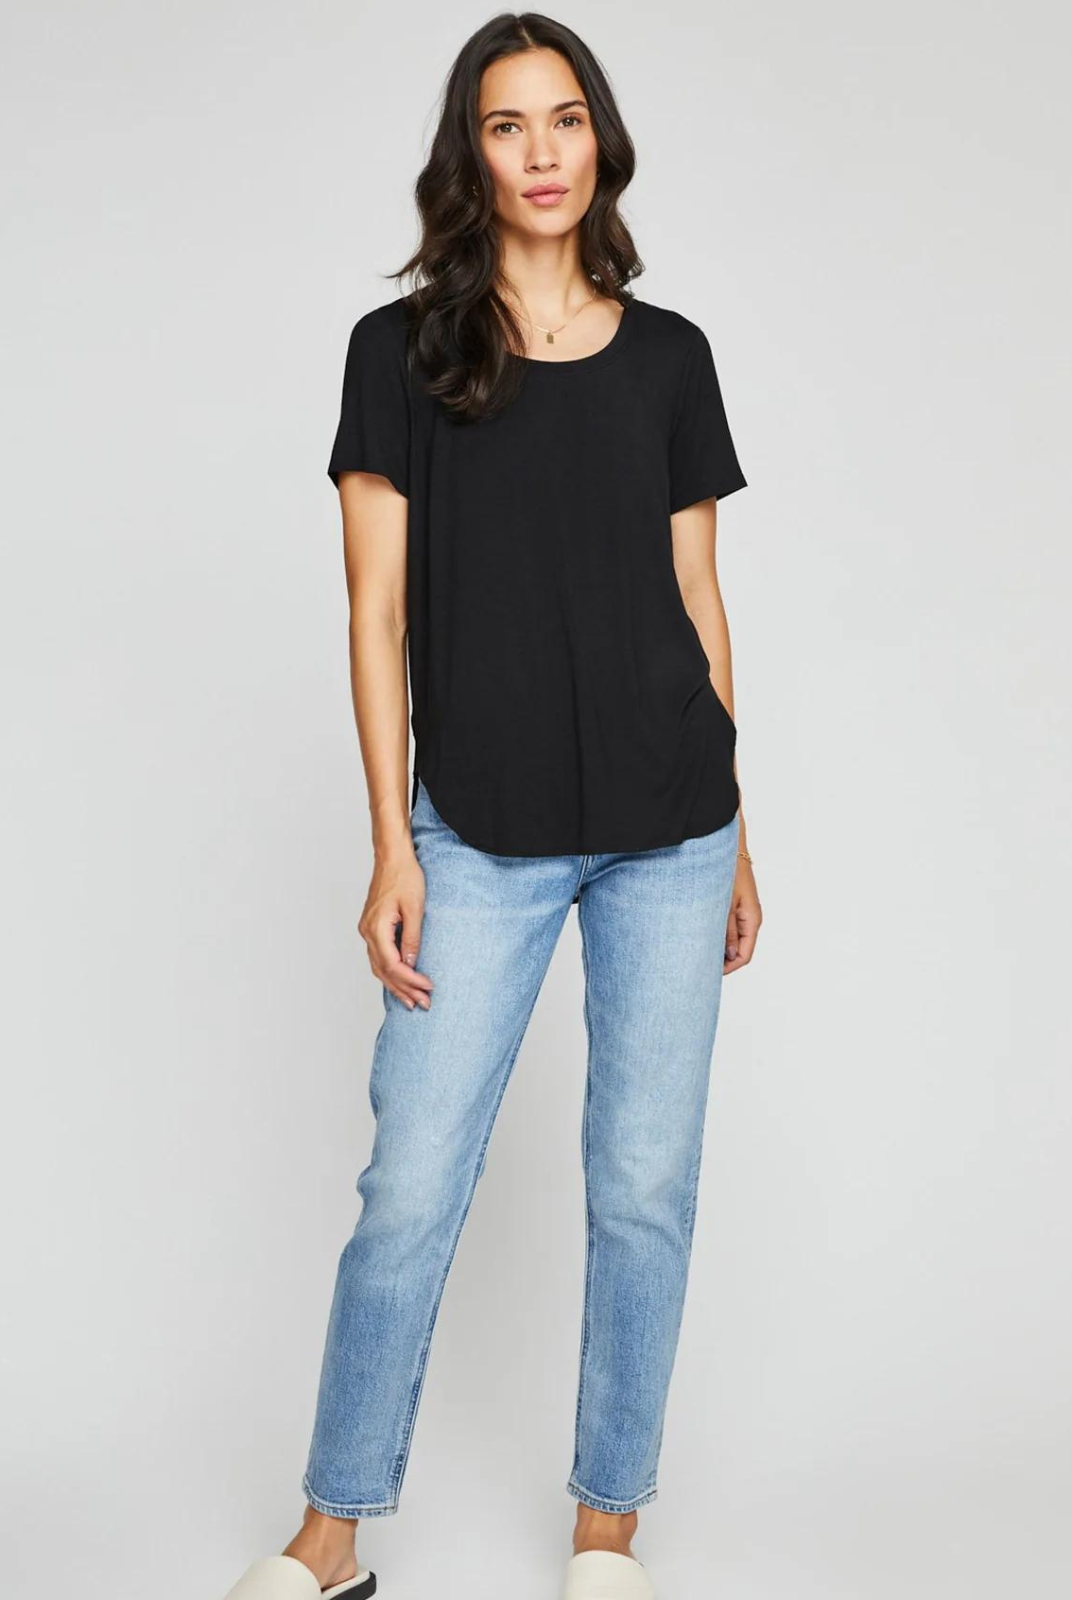 Gentle Fawn Alabama Top- Black. The Alabama tee is a Gentle Fawn classic designed for every day. Made of super soft EcoVero rayon jersey, it’s a closet essential you’ll want in every colour.